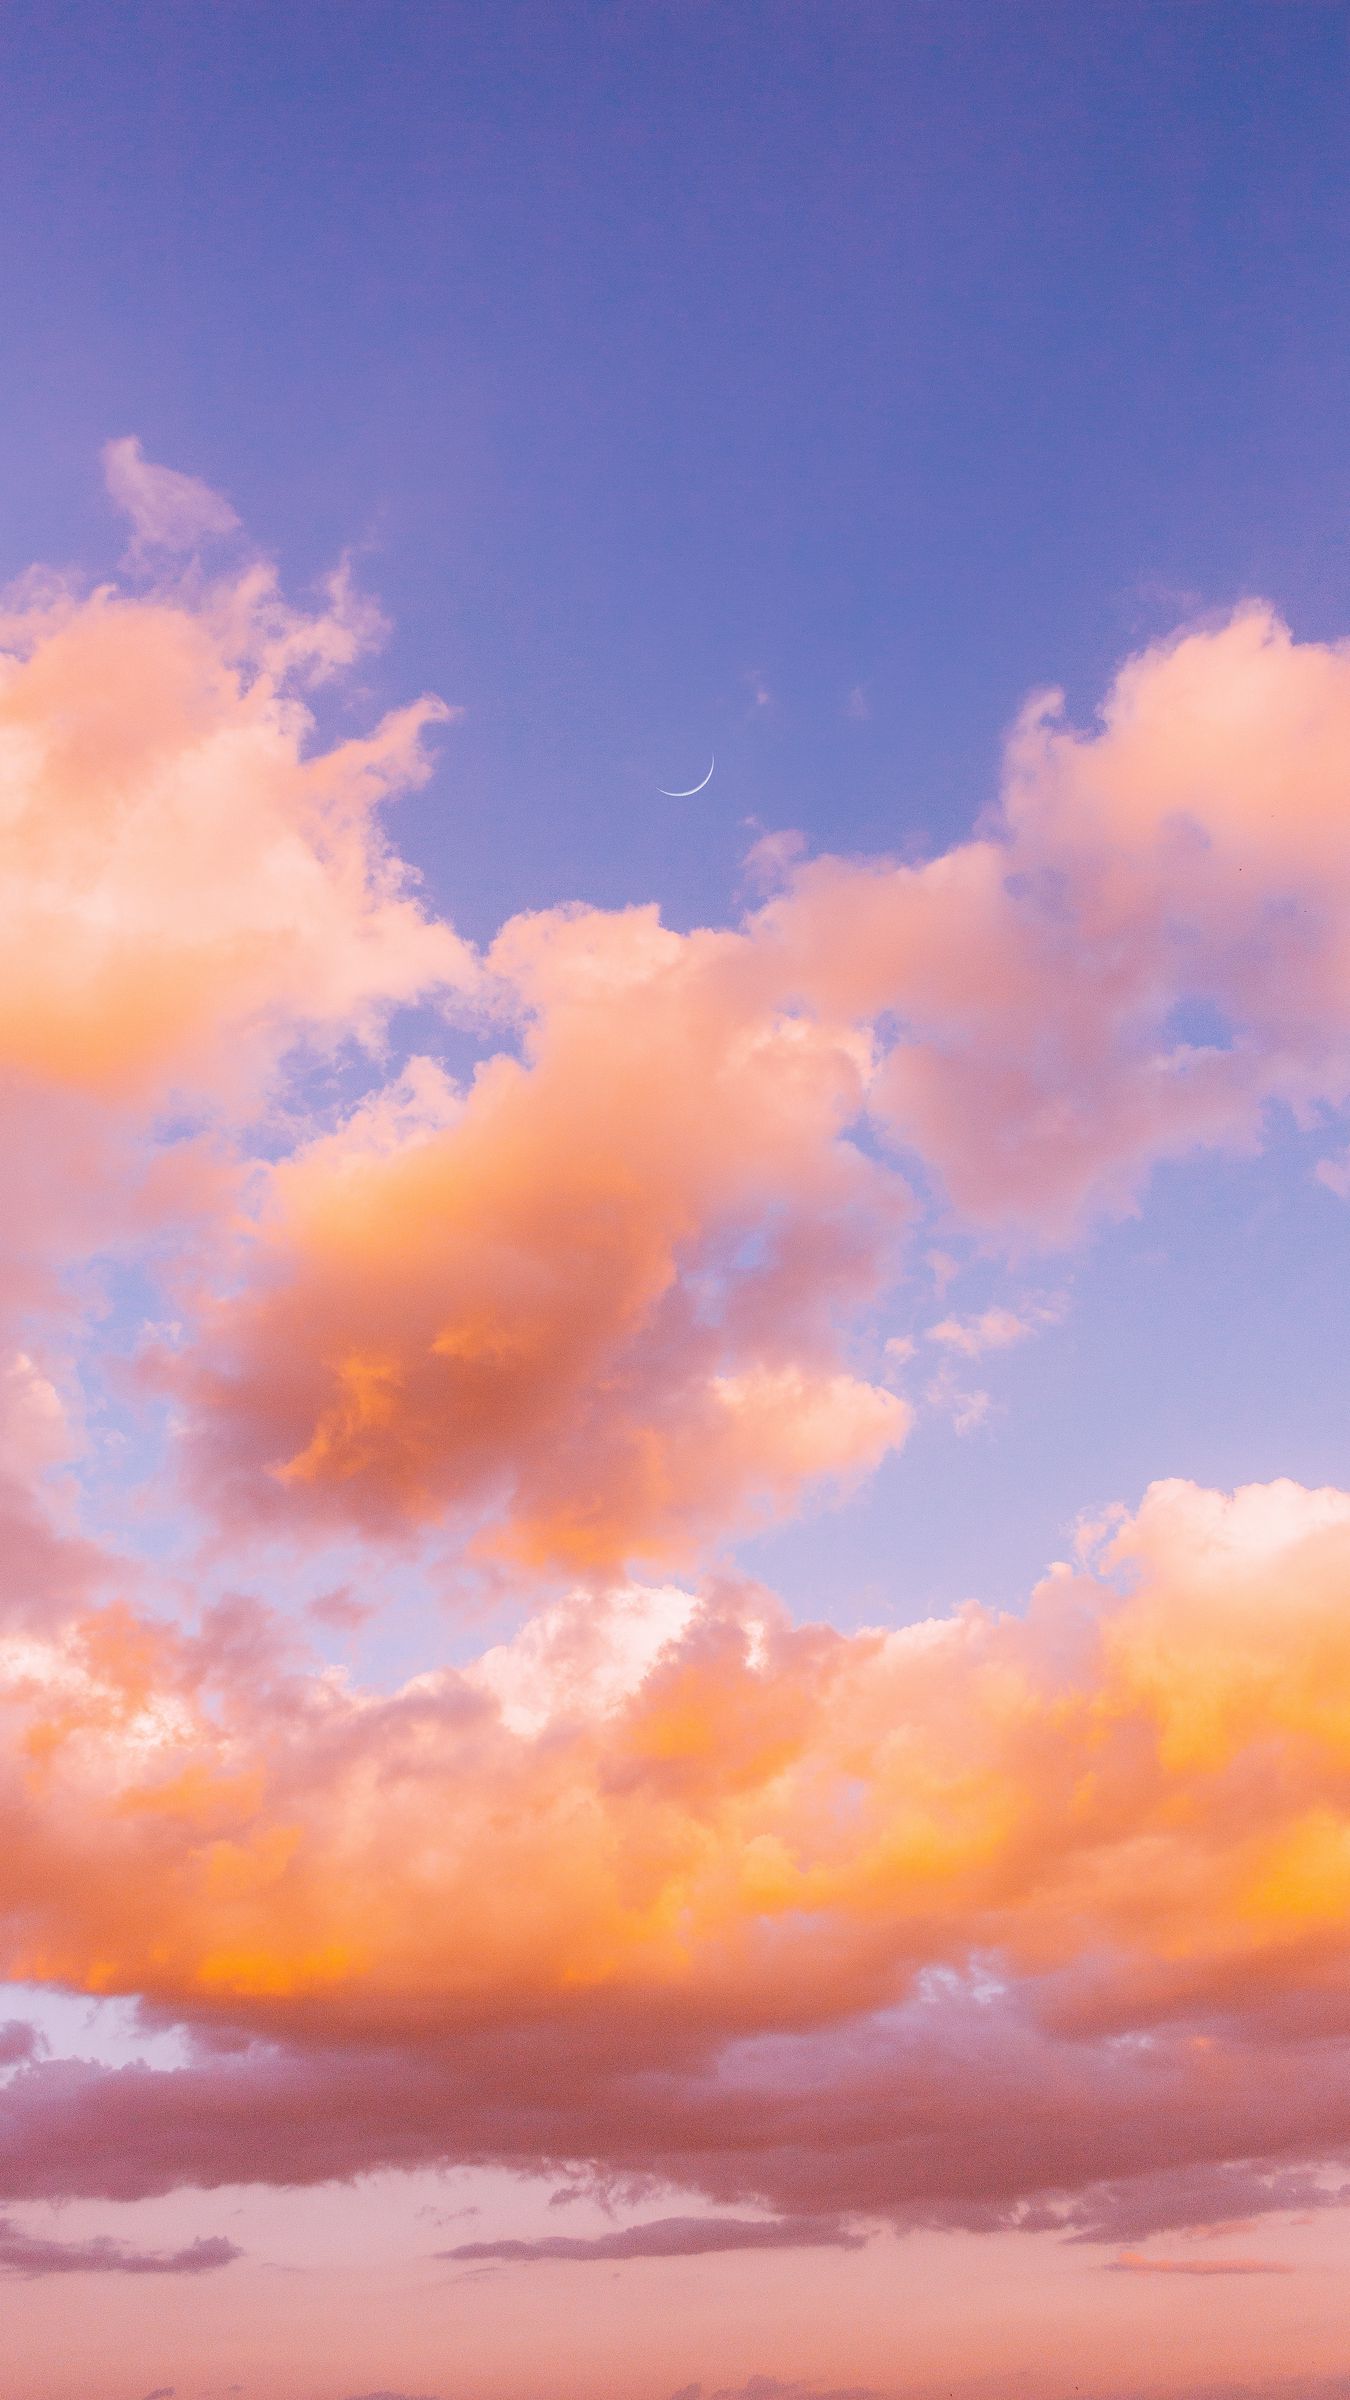 Download Wallpaper X Clouds Sky Porous Orange Iphone S For Parallax Hd